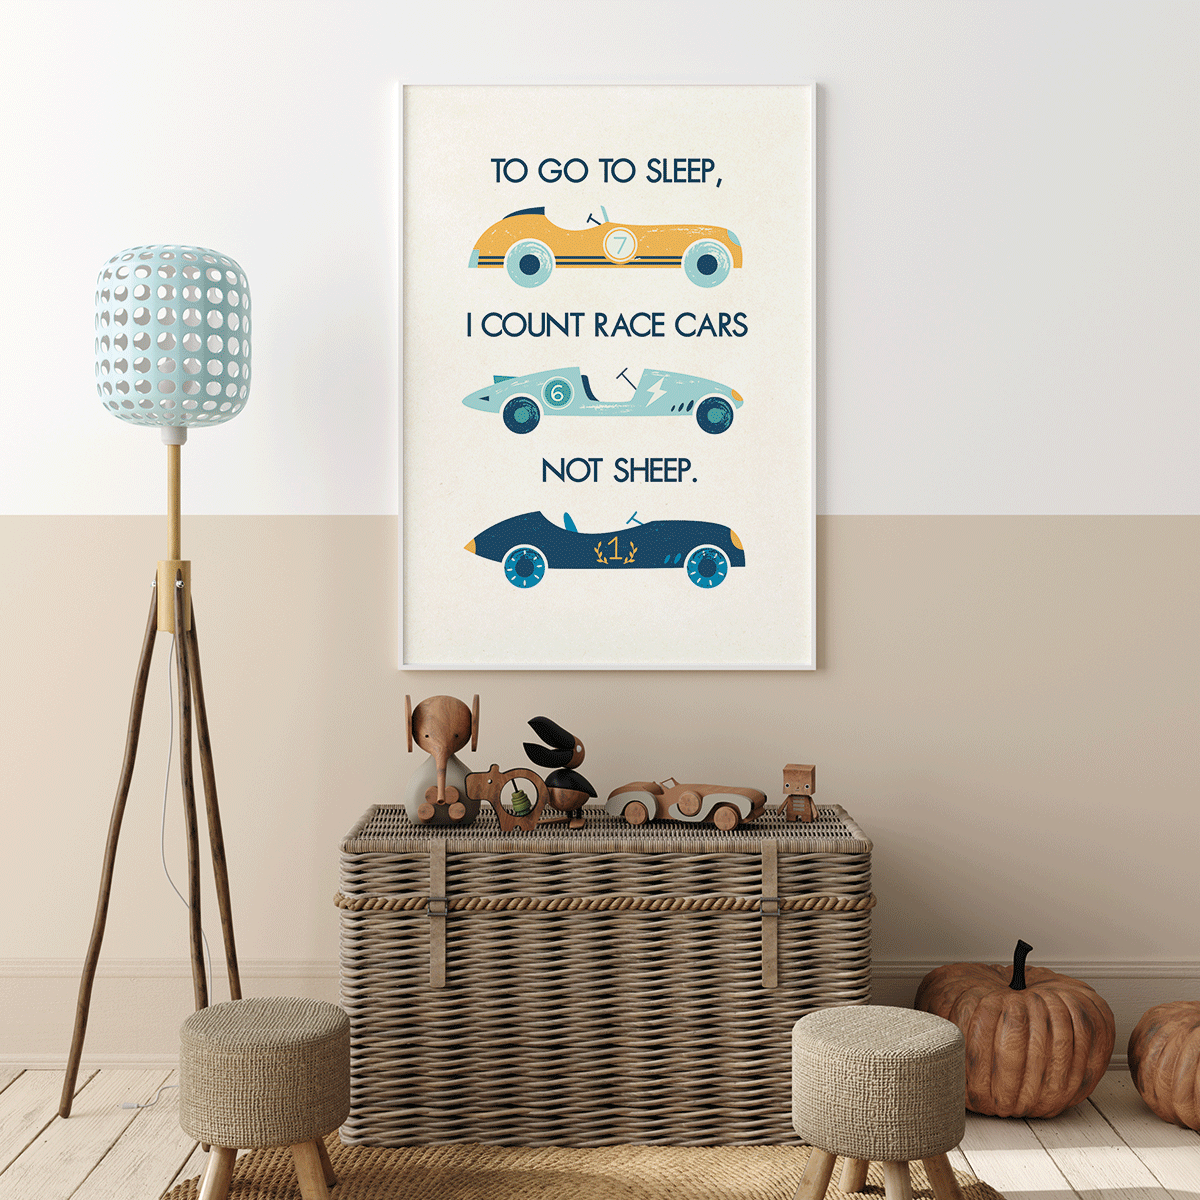 To go to sleep I count race cars - Poster